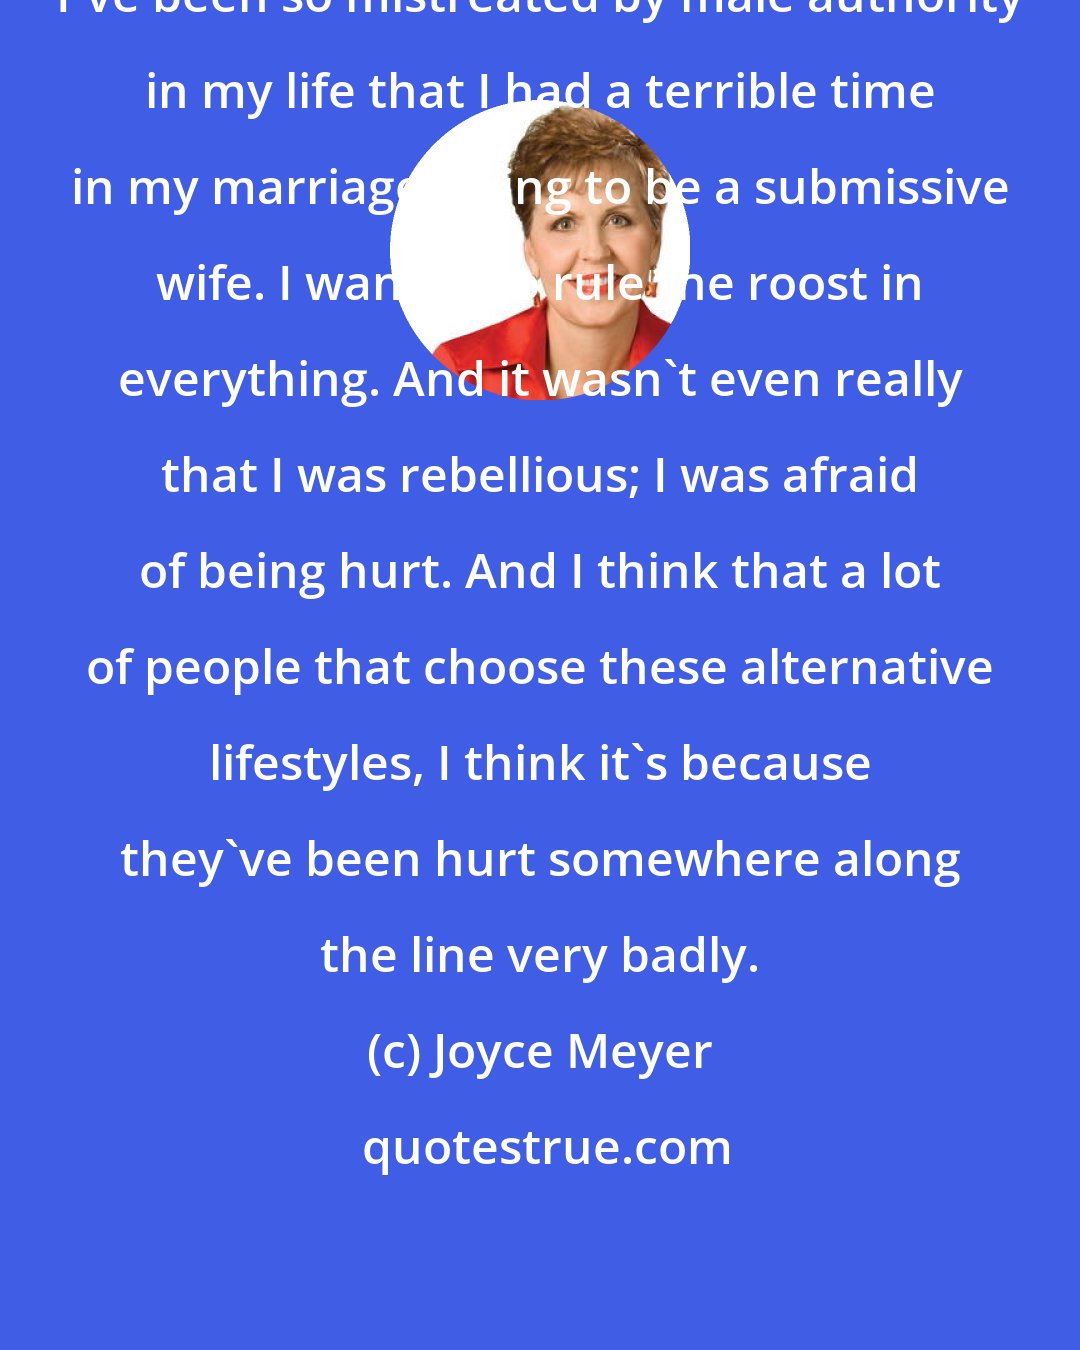 Joyce Meyer: I've been so mistreated by male authority in my life that I had a terrible time in my marriage trying to be a submissive wife. I wanted to rule the roost in everything. And it wasn't even really that I was rebellious; I was afraid of being hurt. And I think that a lot of people that choose these alternative lifestyles, I think it's because they've been hurt somewhere along the line very badly.